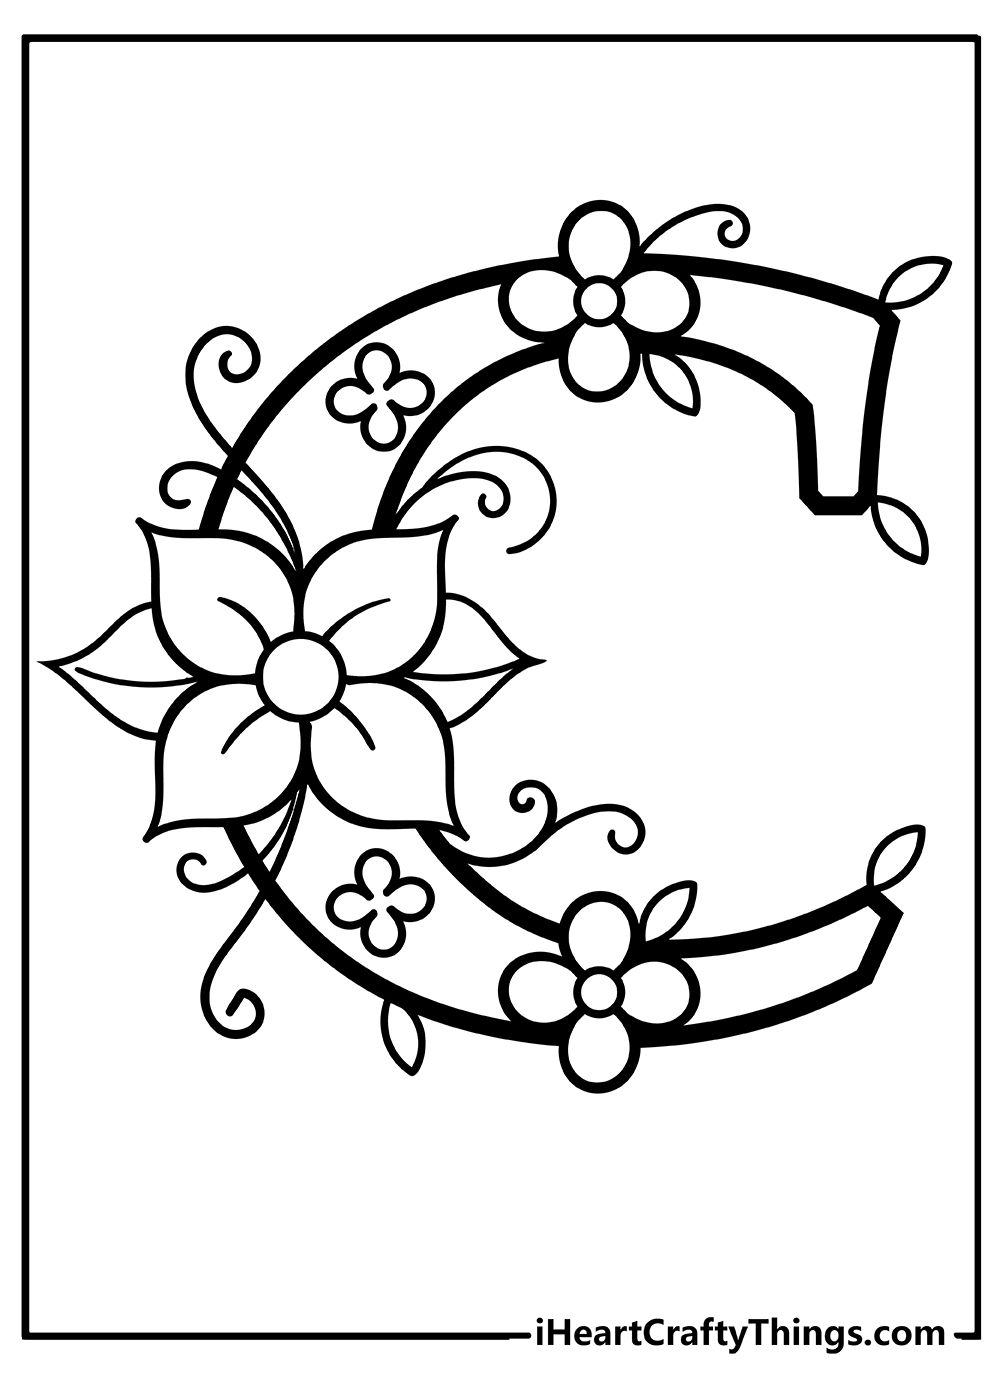 Letter C Coloring Pages for adults free printable